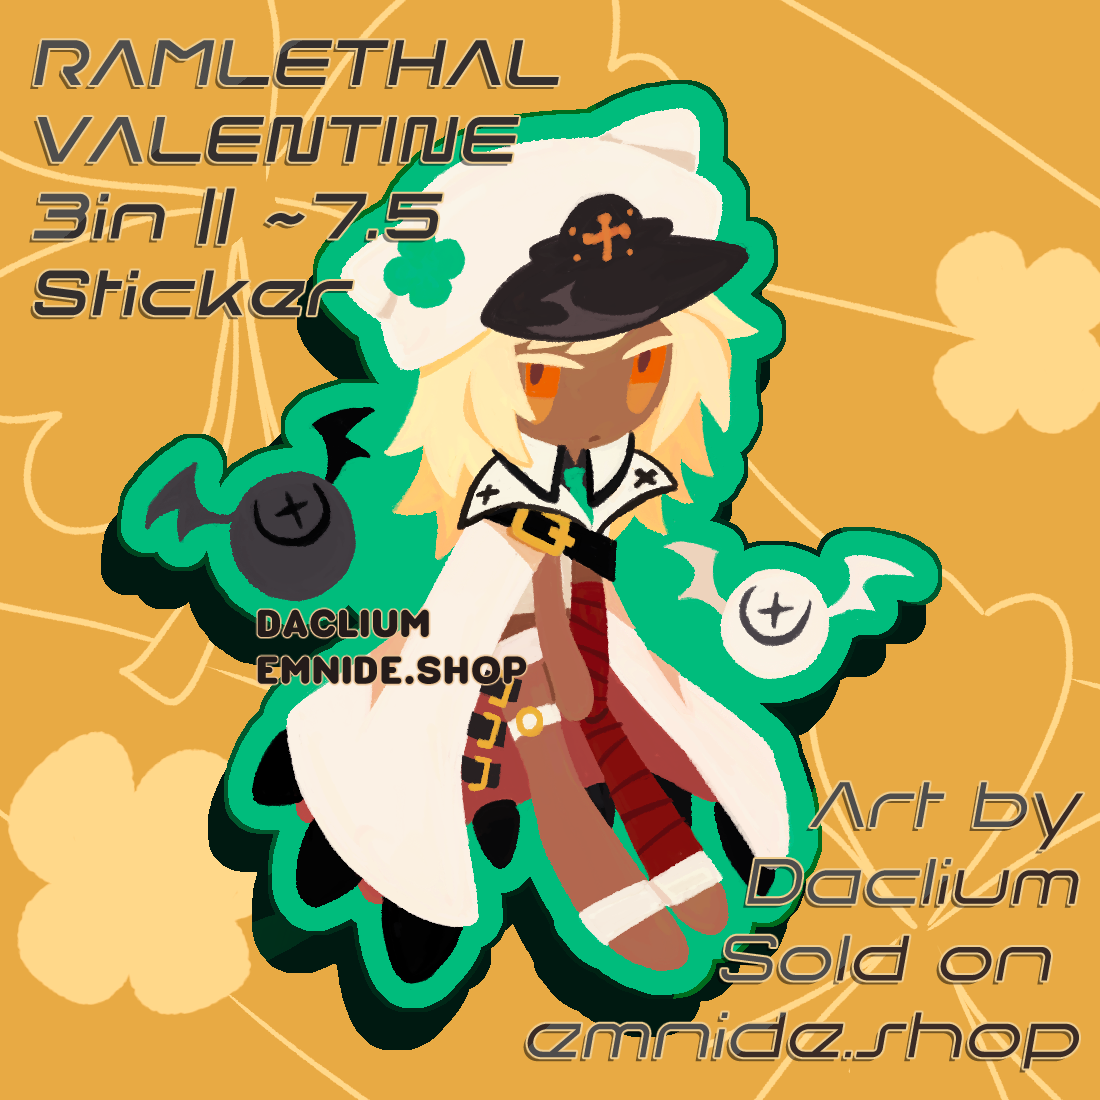 Sticker design of Ramlethal from Guilty Gear in a cartoony, chibi art style. Green sticker border.